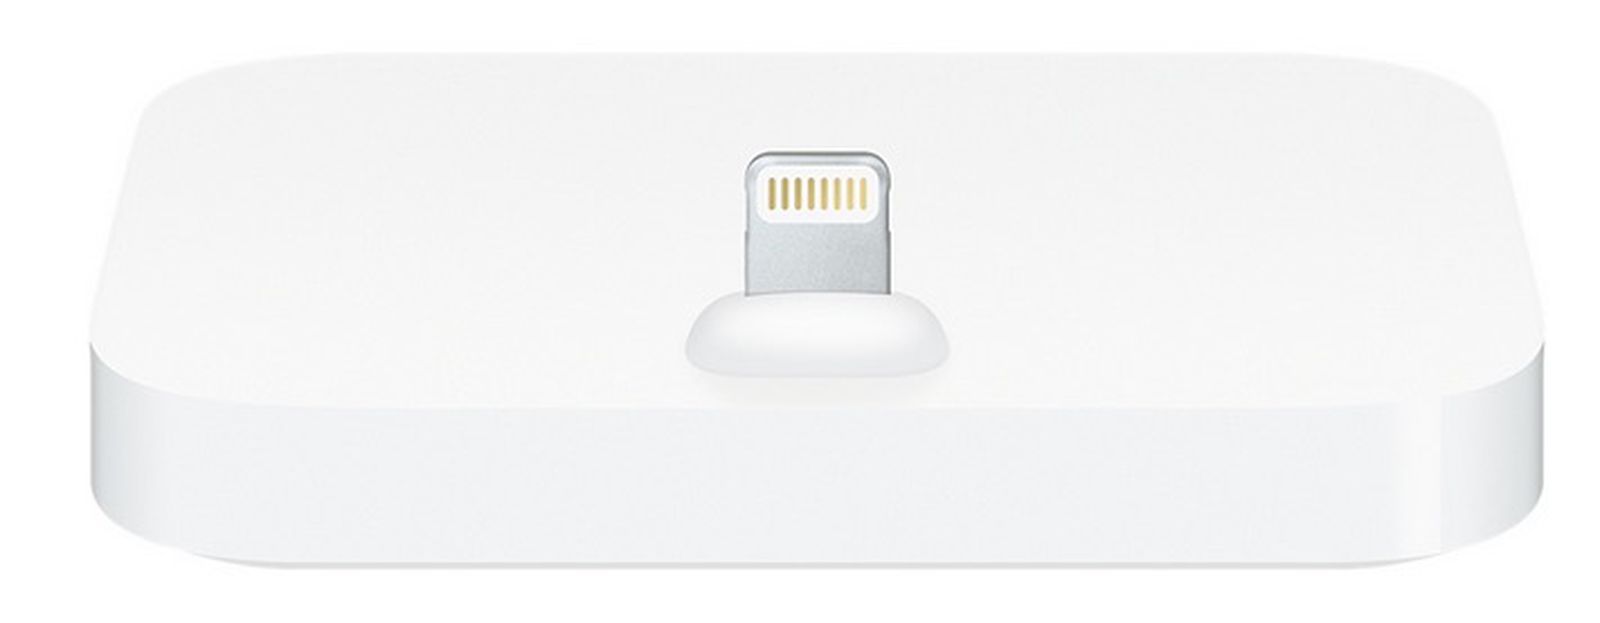 Apple Introduces New iPhone Dock With Lightning Connector for $39 -  MacRumors